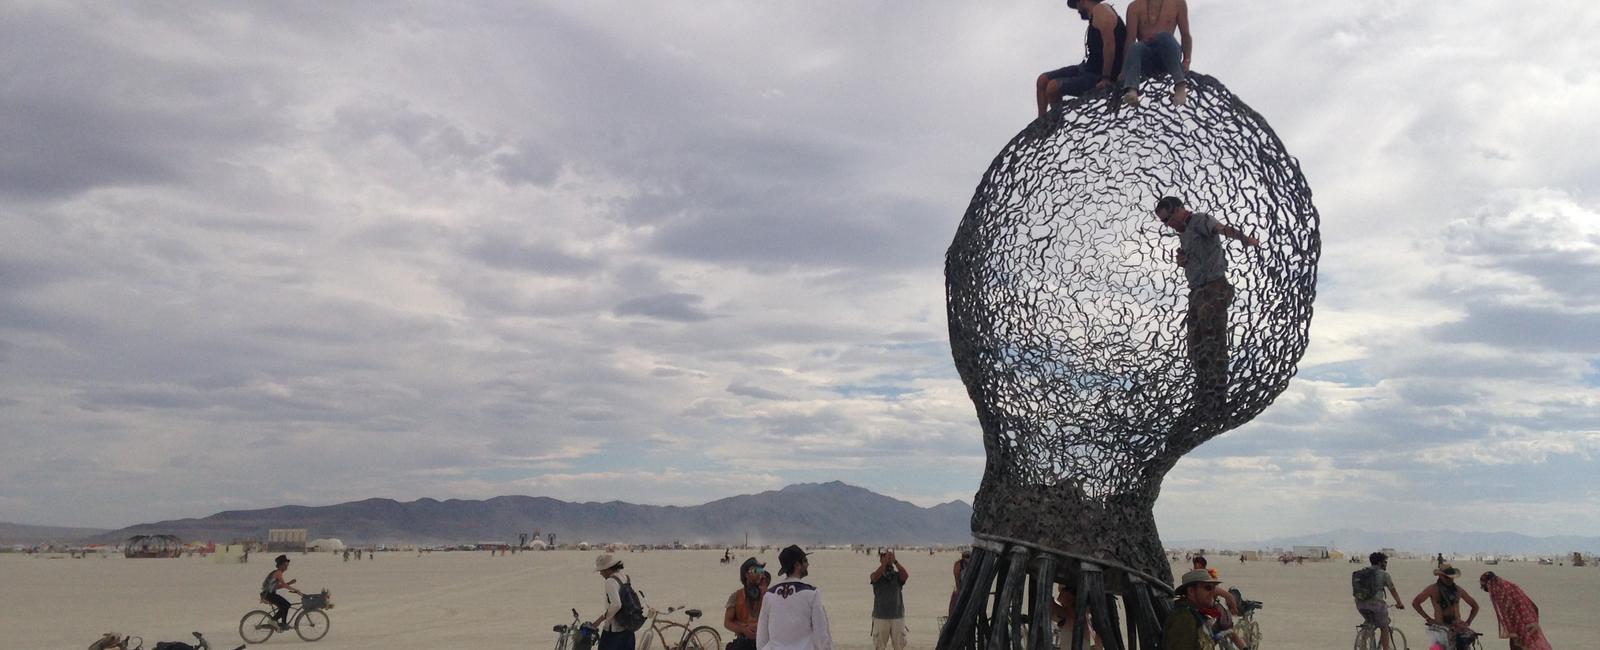 After the burning man festival a cleaning crew combs through the grounds to clean up moop or trash as small as single hairs from wigs in order to pass a federal inspection